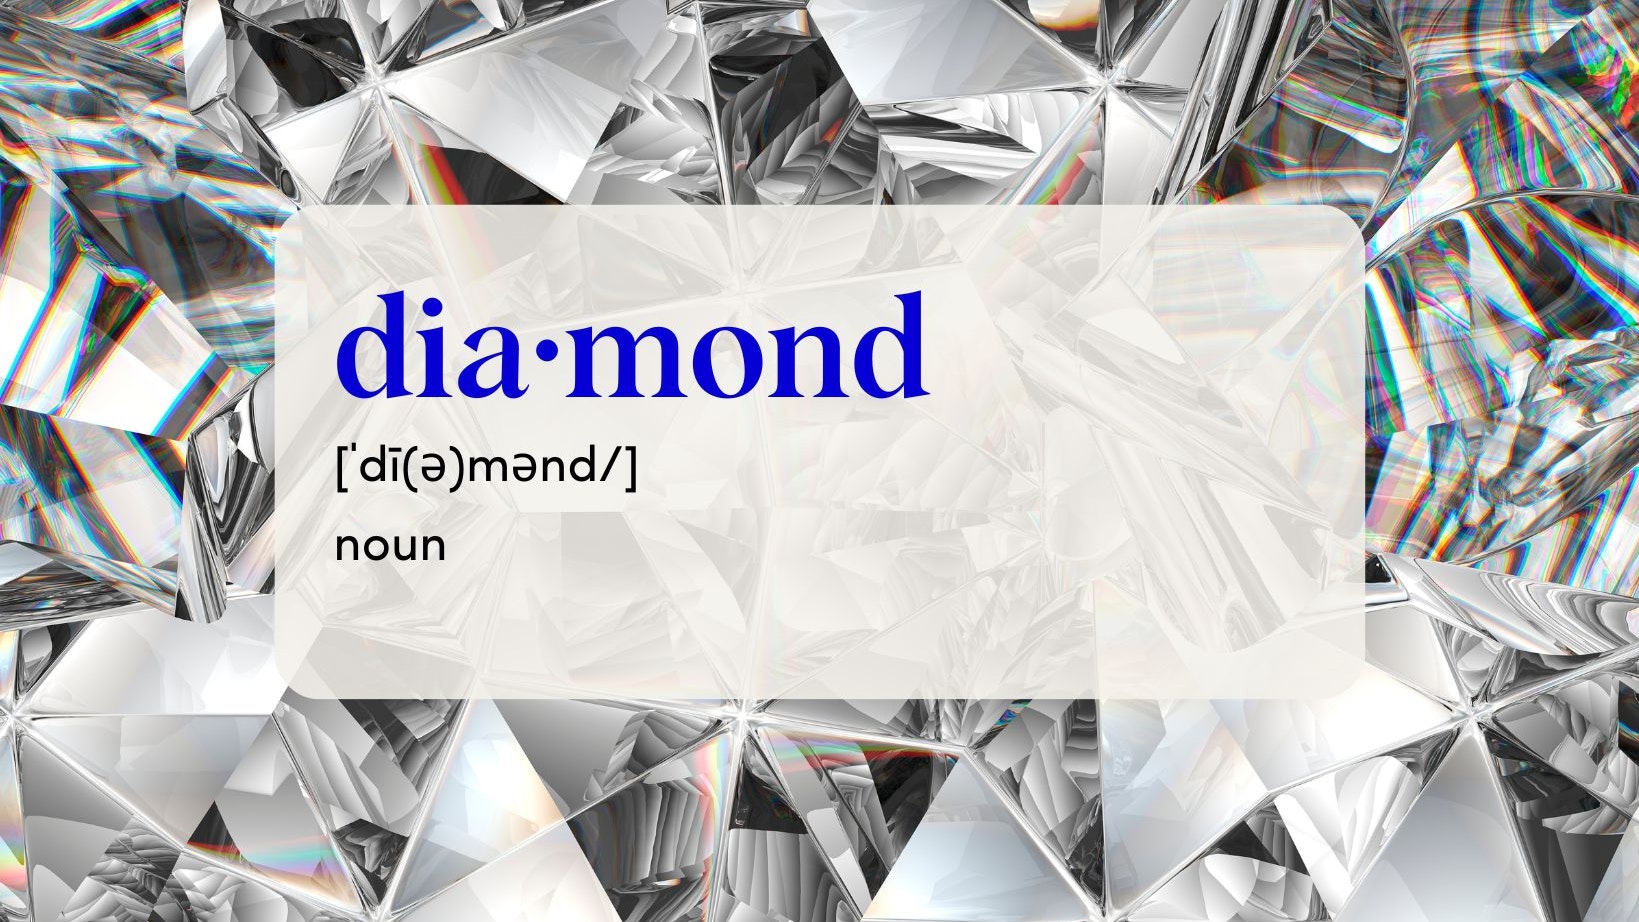 What is a Diamond?